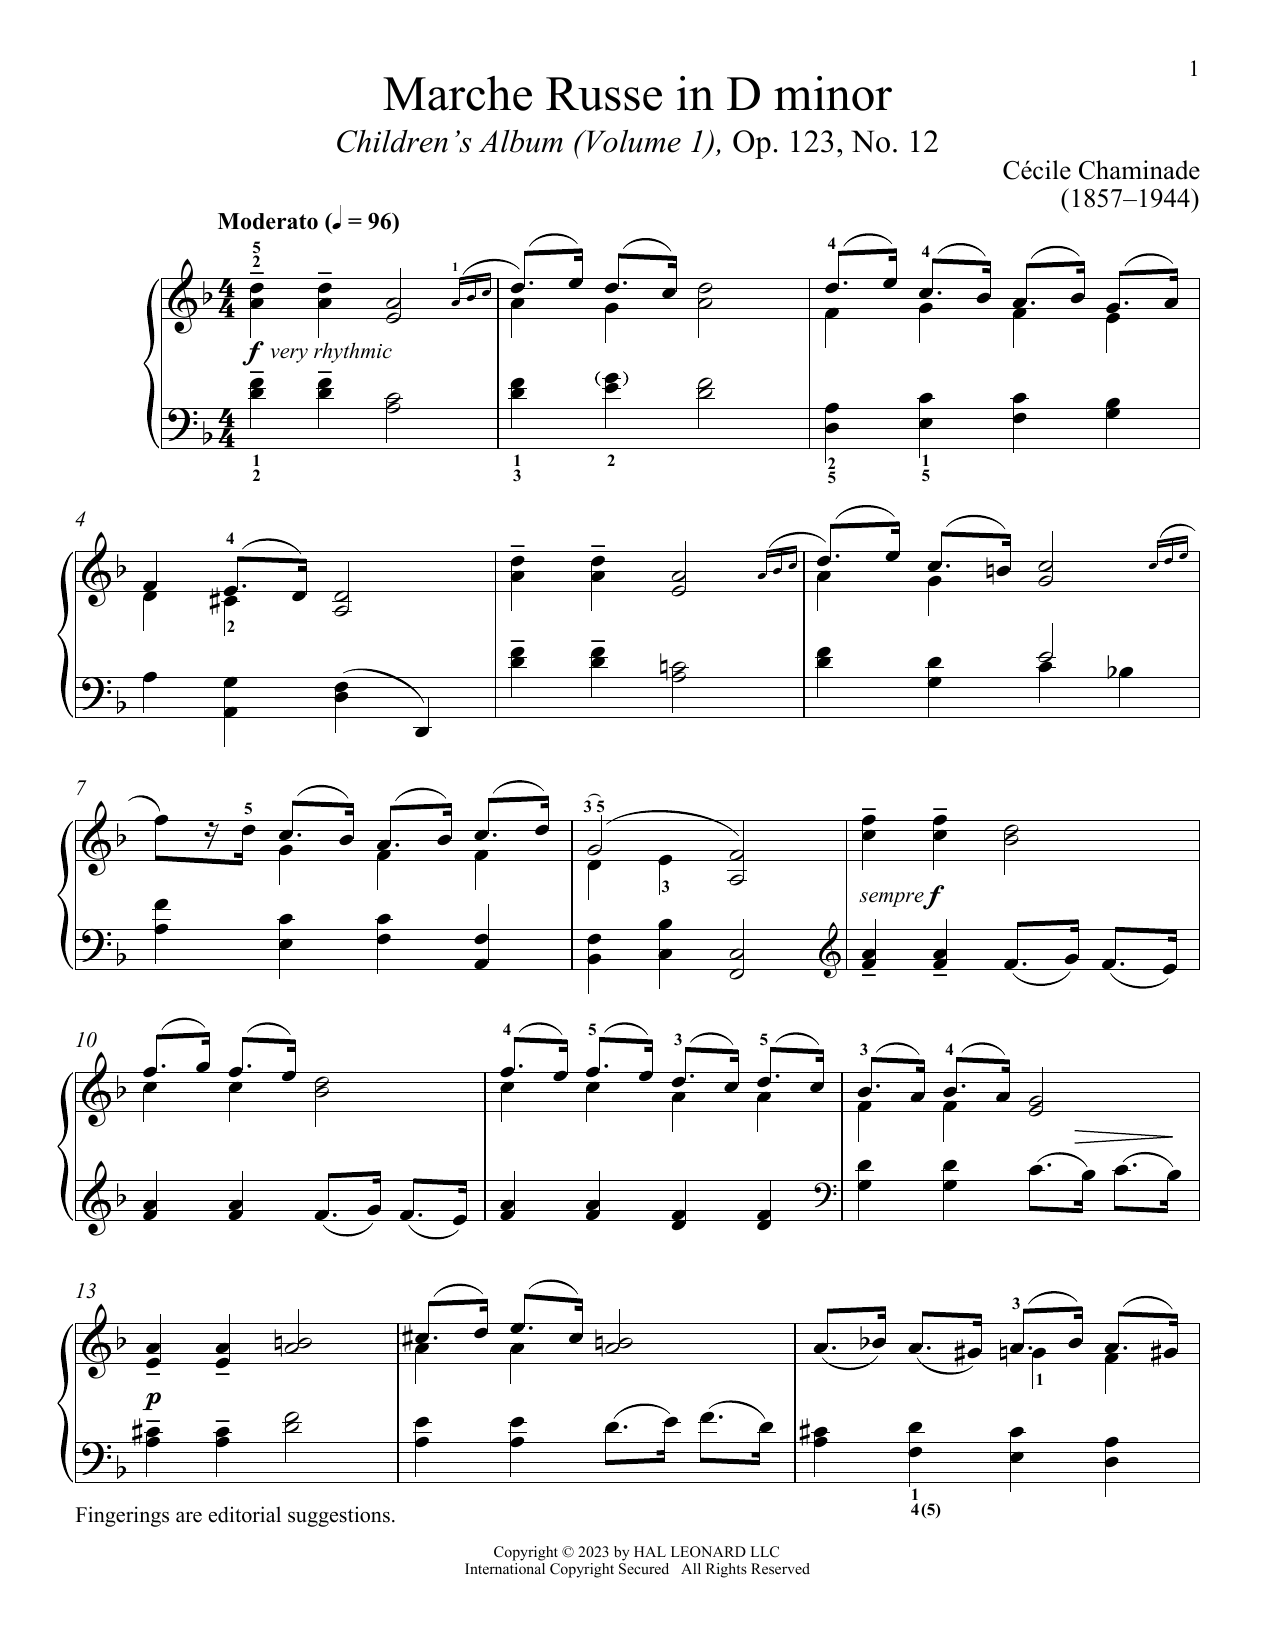 Download Cecile Chaminade Marche Russe Sheet Music